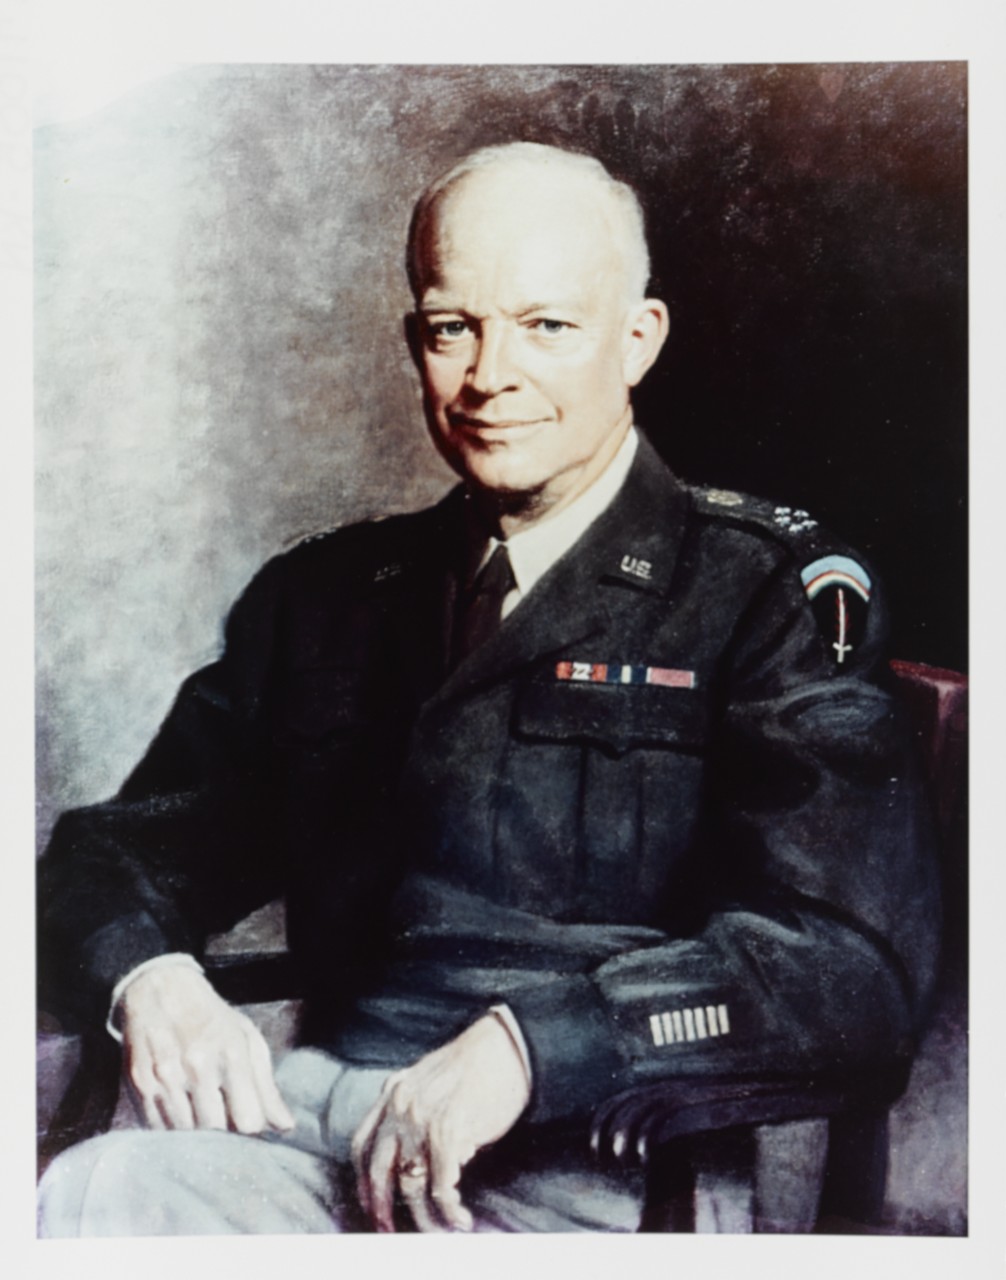 Photo #: NH 71005-KN General of the Army Dwight D. Eisenhower,